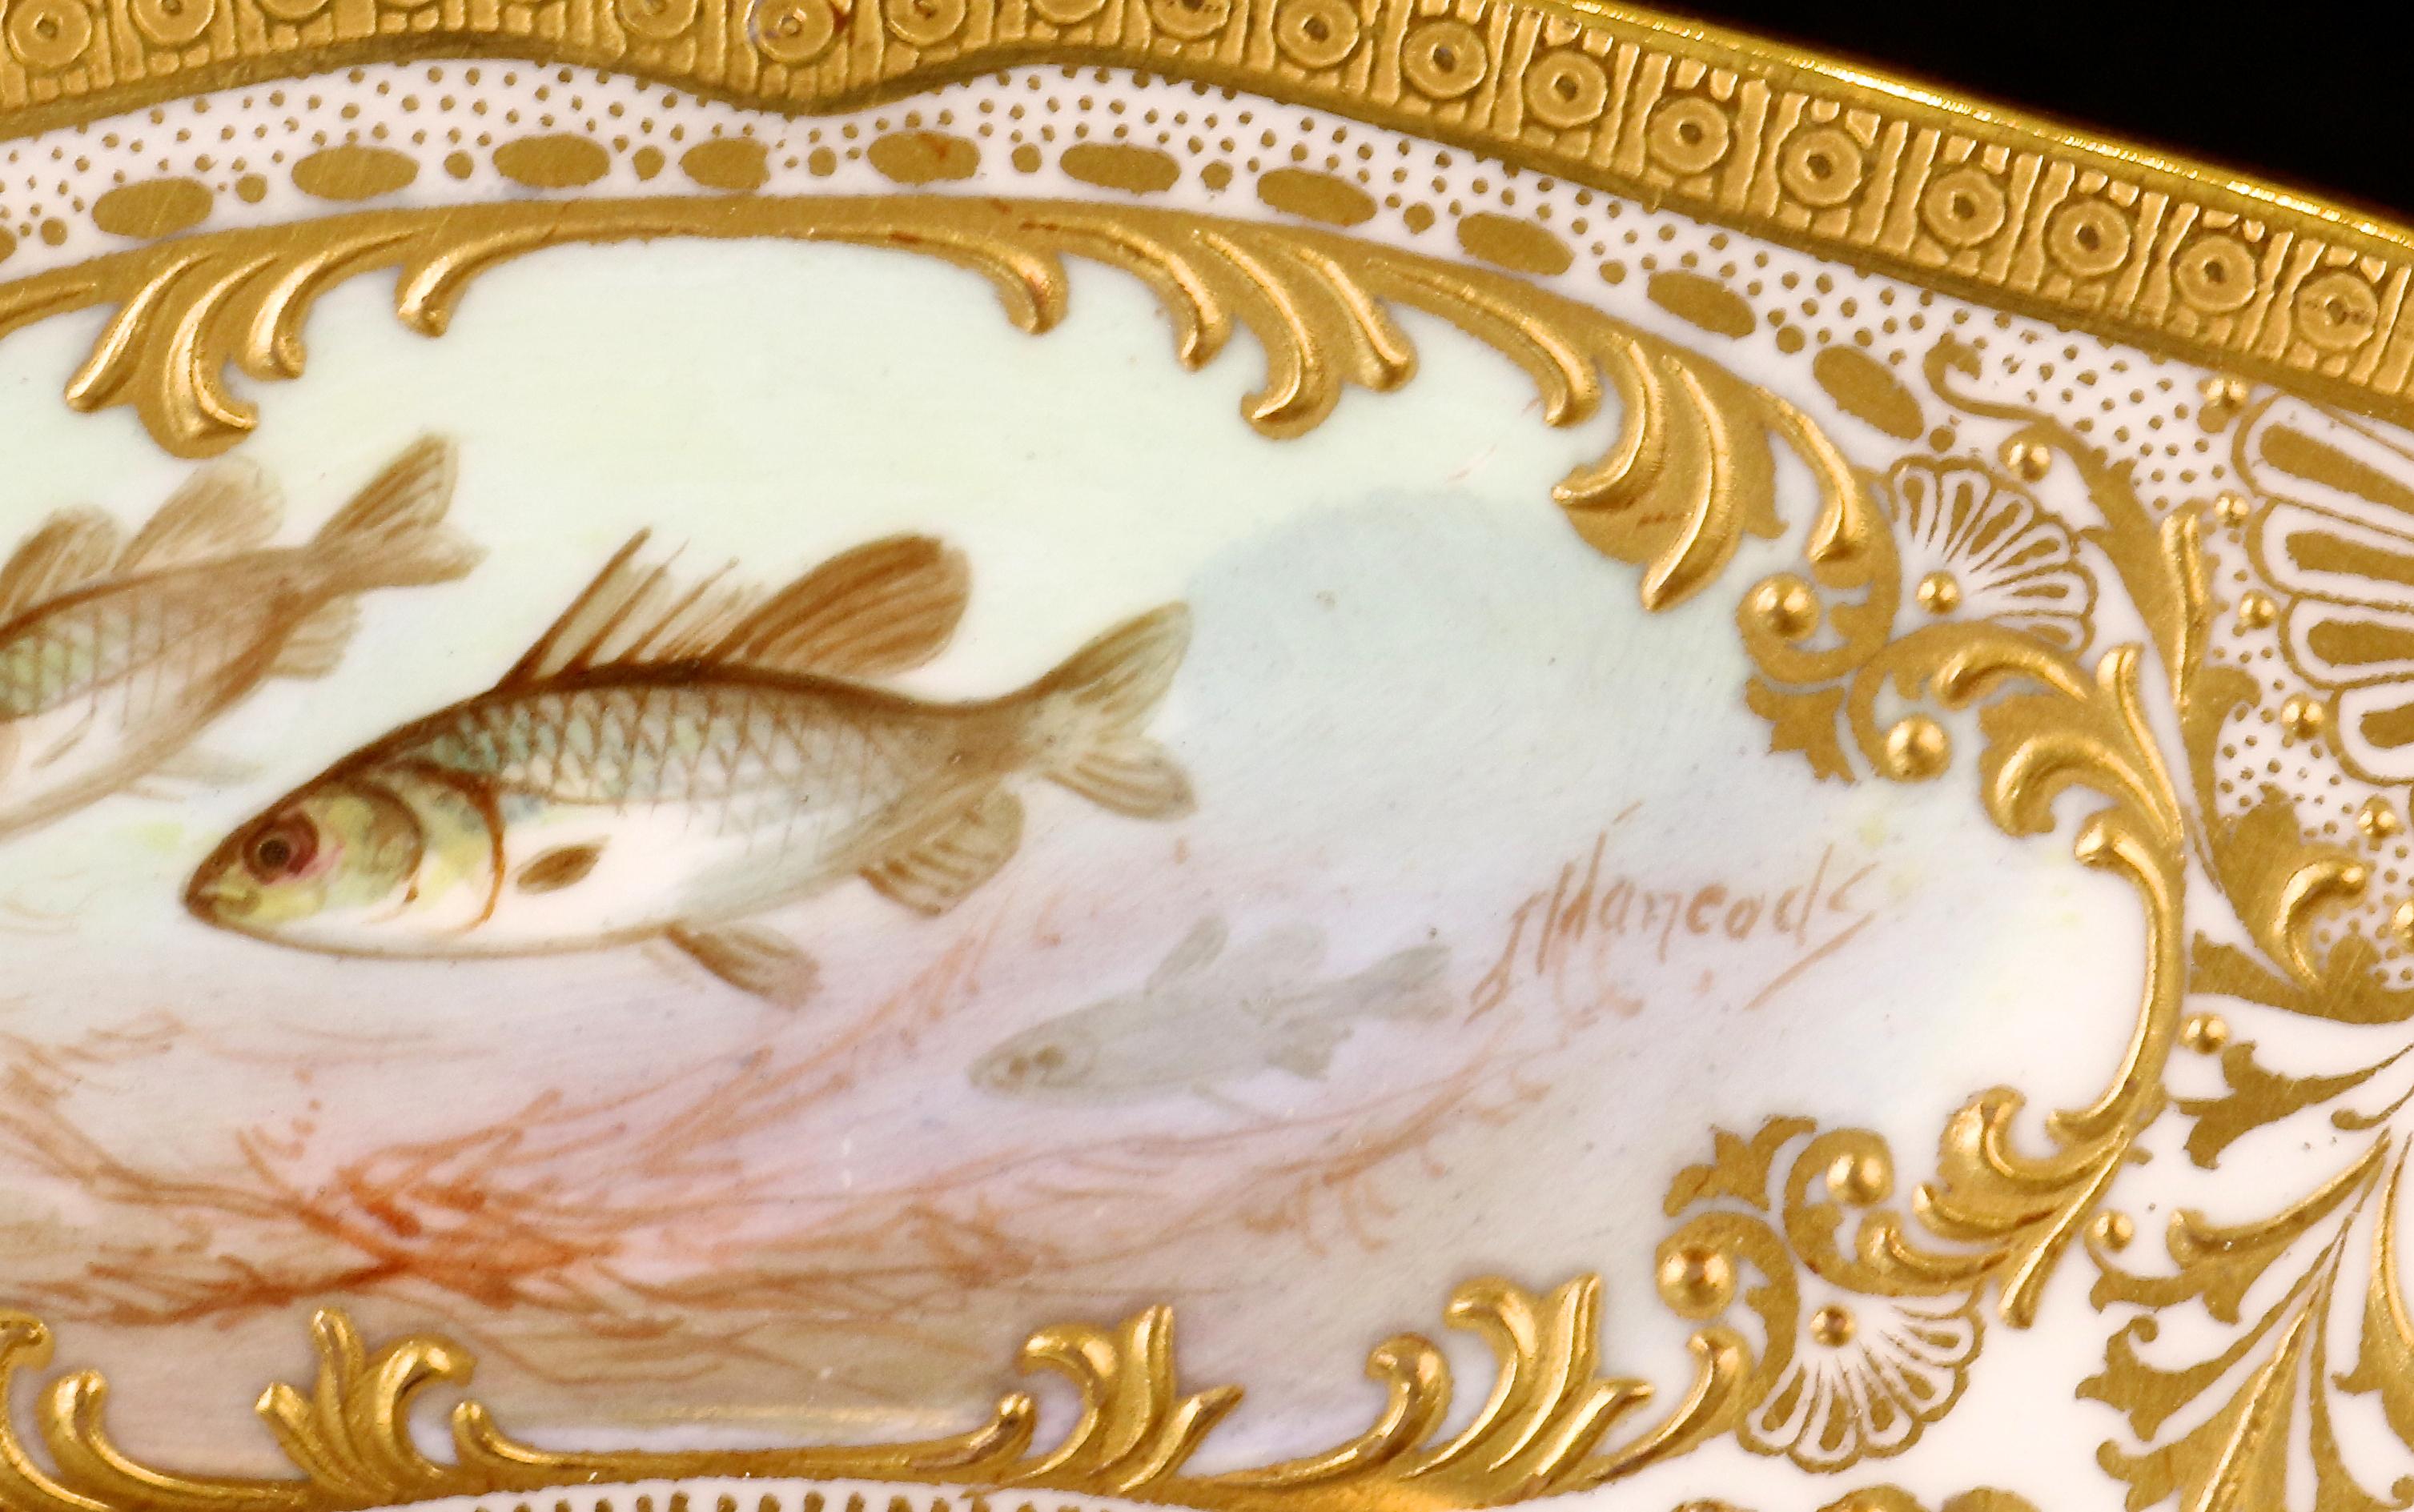 12 Royal Doulton Hand Painted and Heavily Gilded Fish Plates (Ästhetizismus) im Angebot